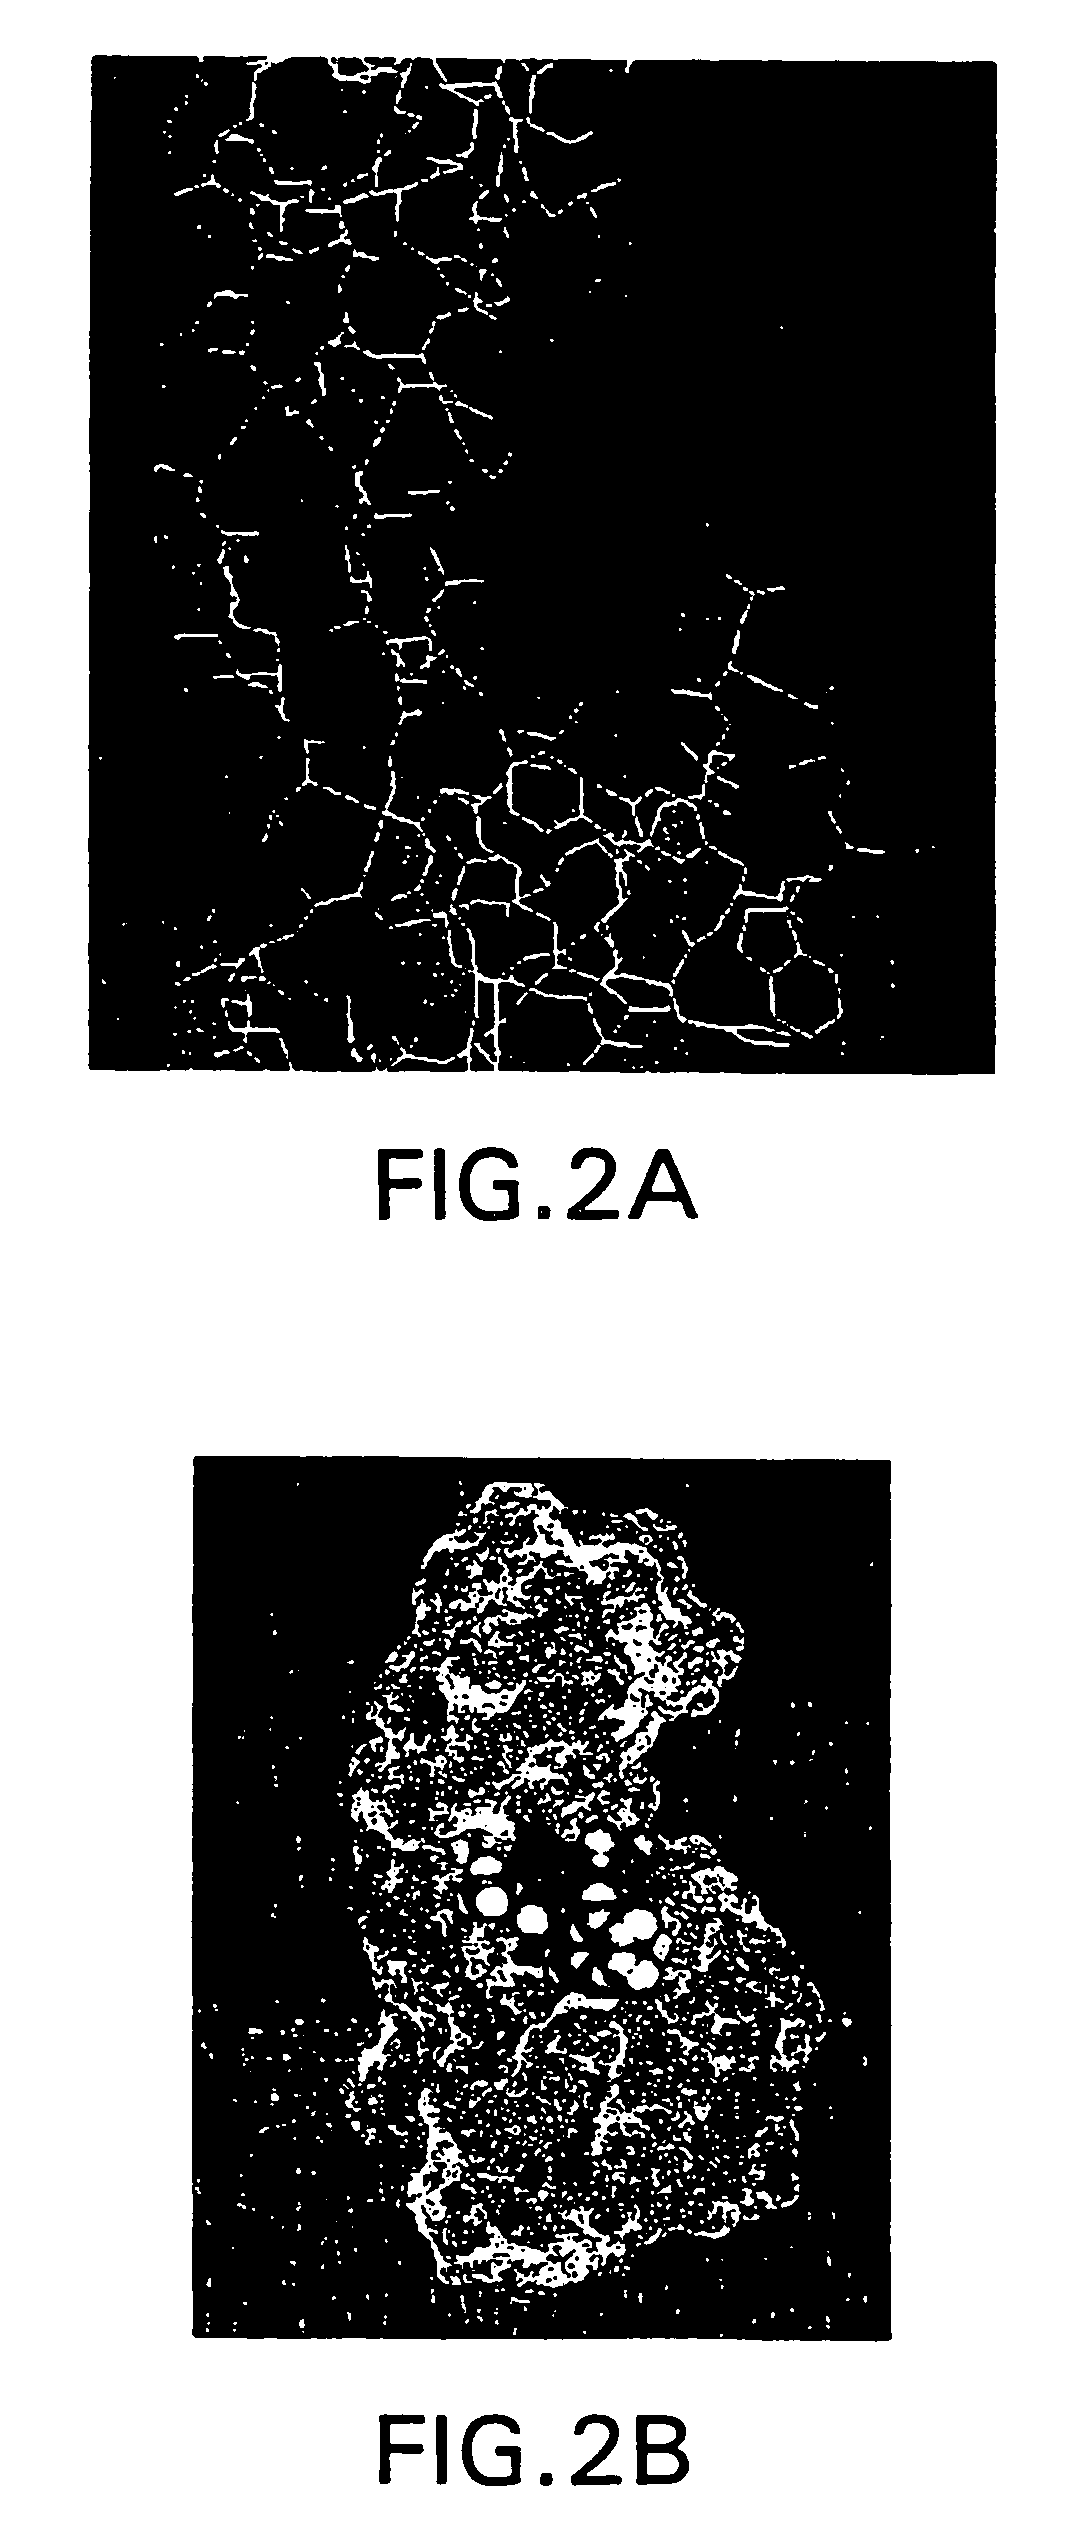 Cavity induced allosteric modification of intermolecular interactions and methods of identifying compounds that effect the same